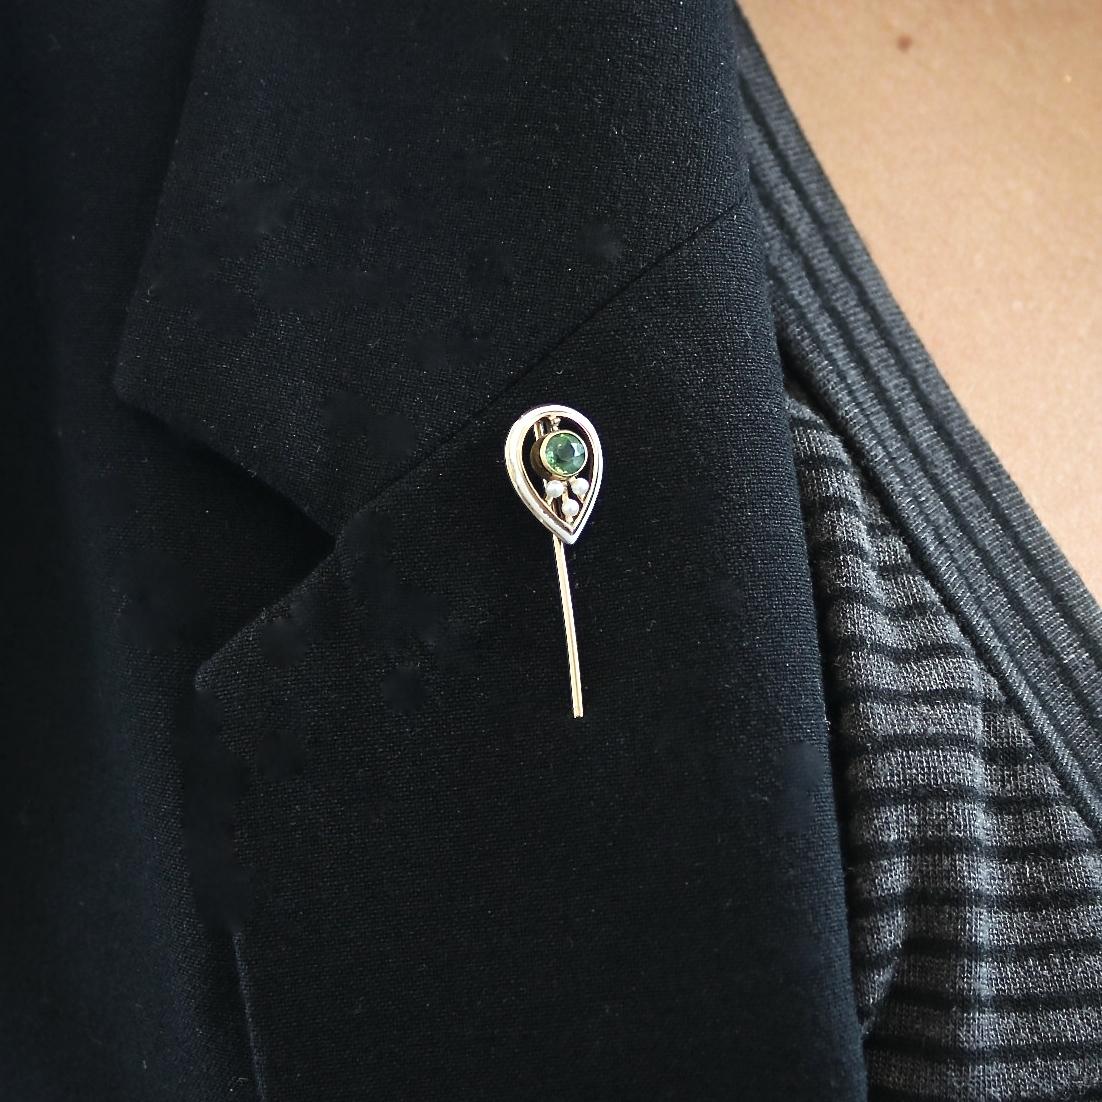 14k yellow gold Edwardian Pin with a round faceted green tourmaline that weighs approximately 0.30 carats, seed pearls, and decorated with white enamel. Circa 1900.
Our 1stdibs Recognized Dealer/Platinum Seller Guarantees: 
7 day return policy for